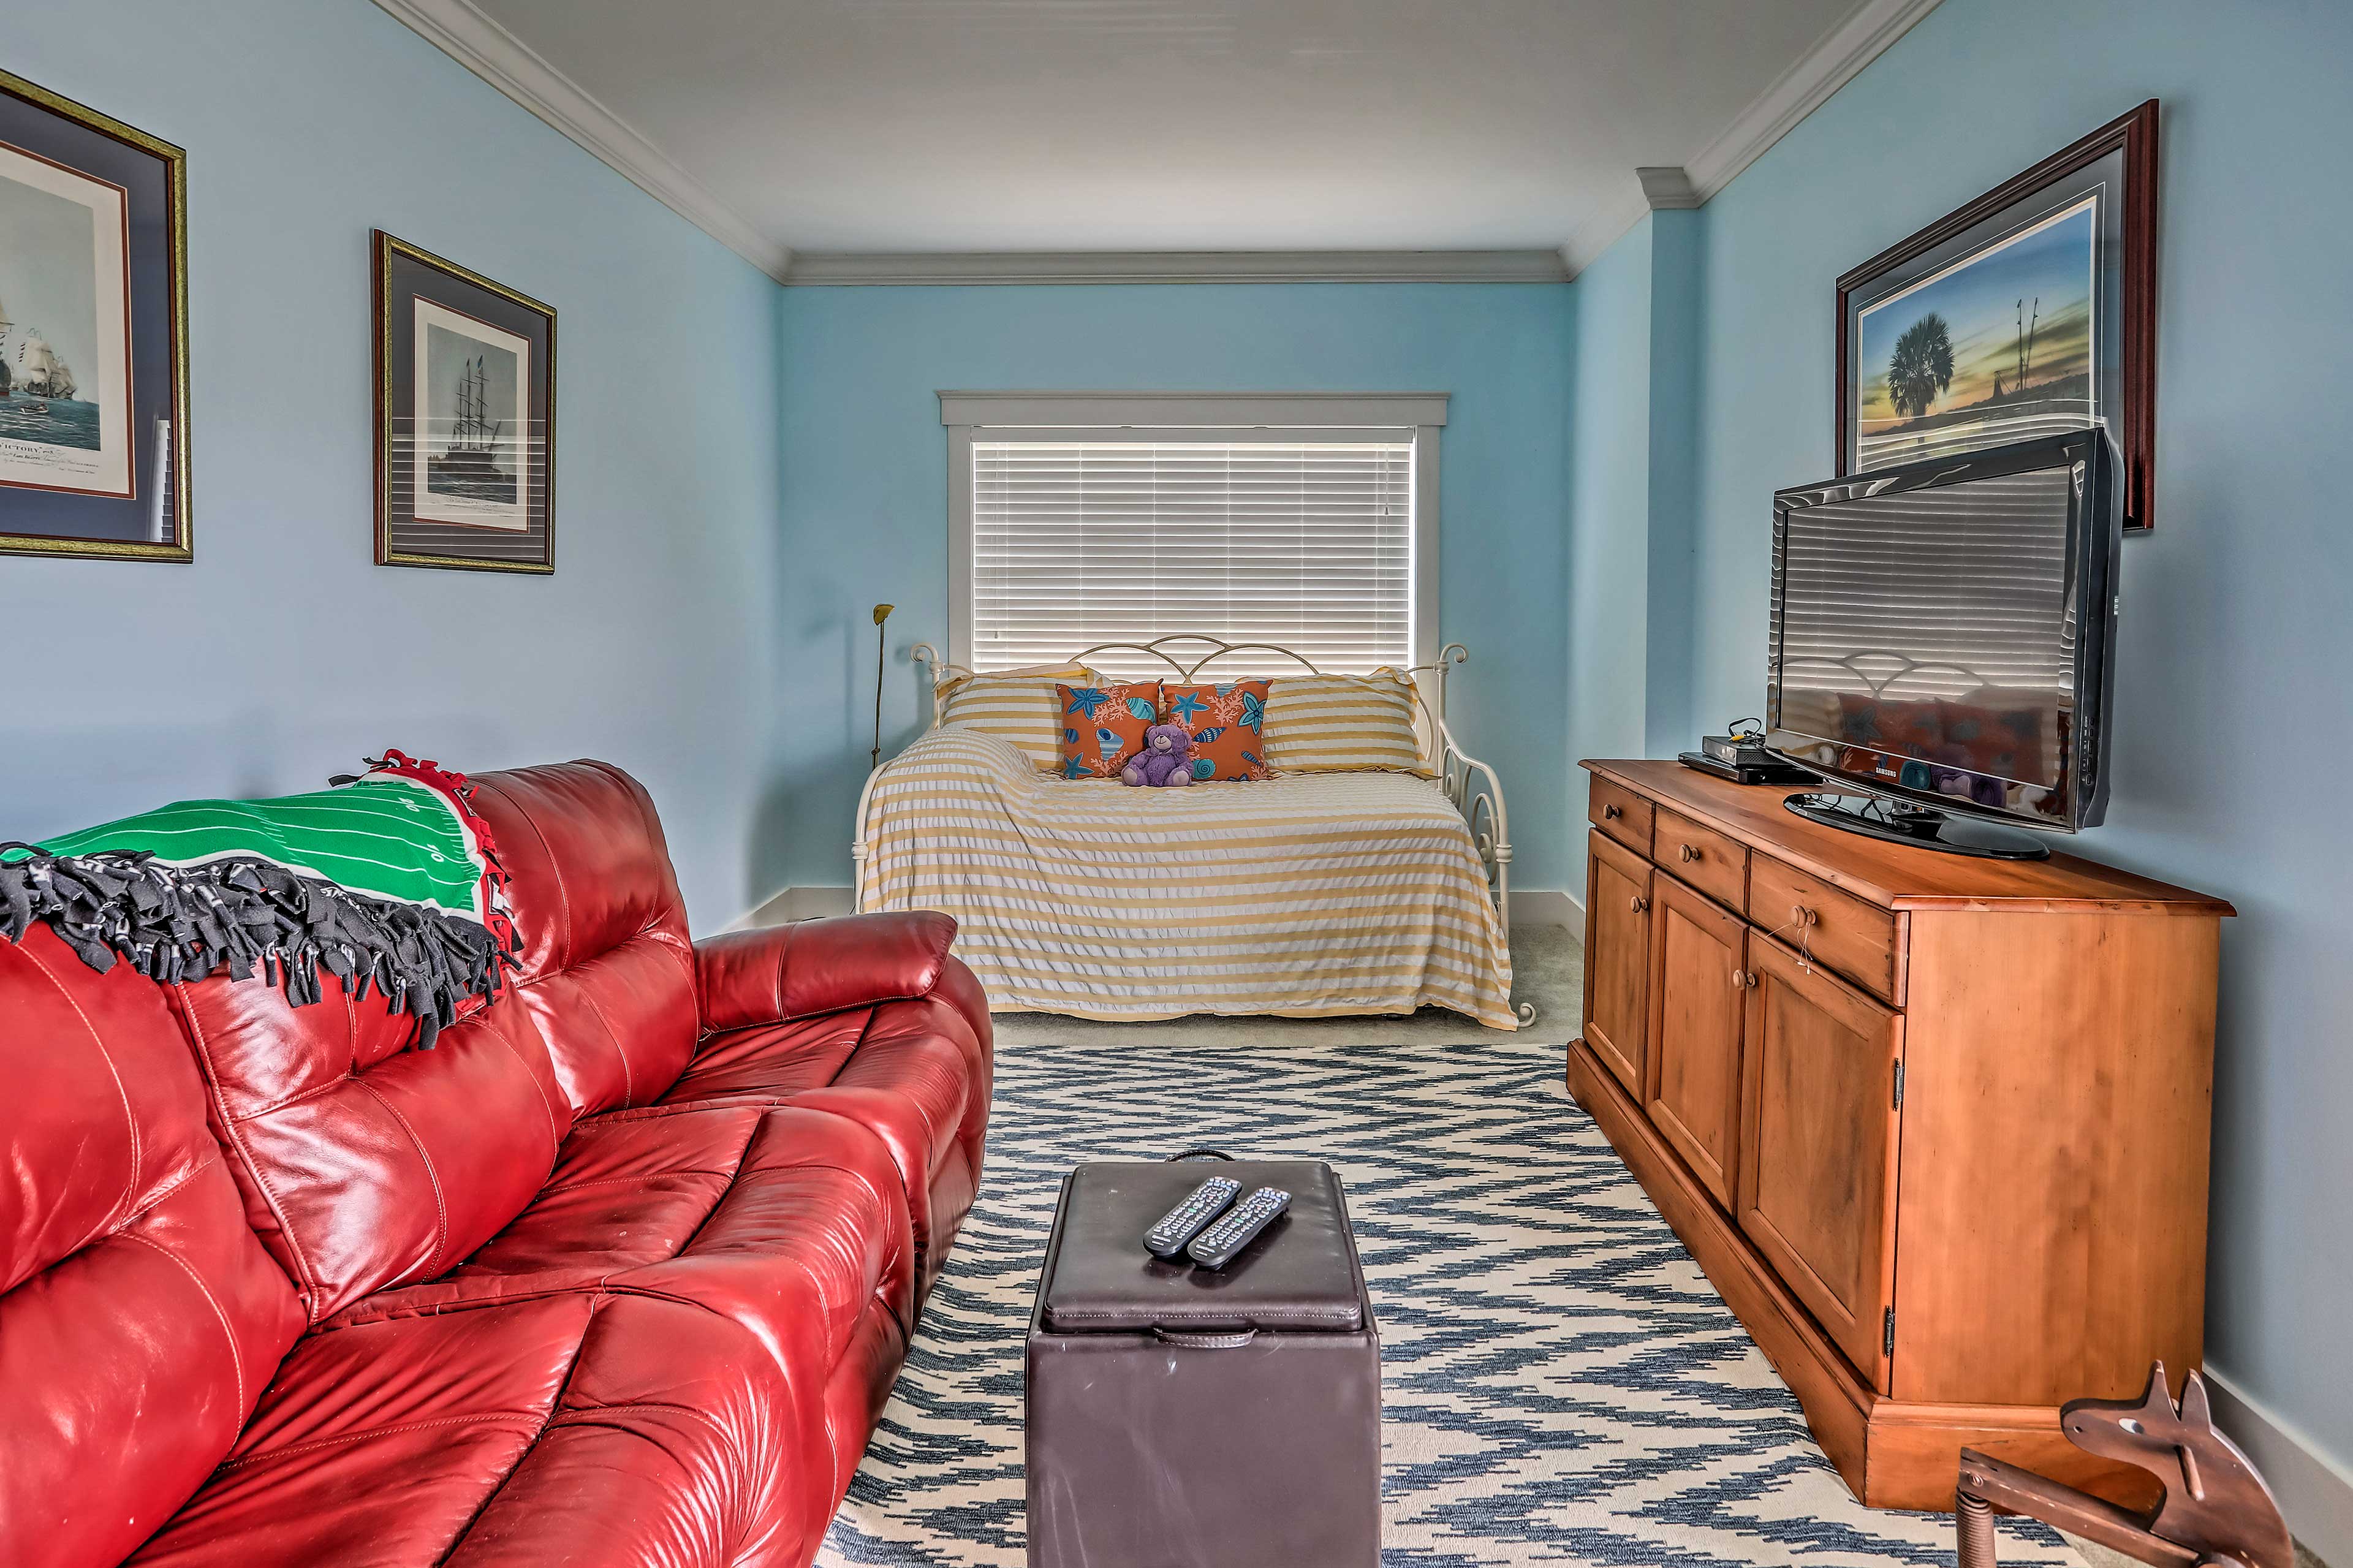 The upstairs landing hosts a twin daybed with a trundle, along with a TV.